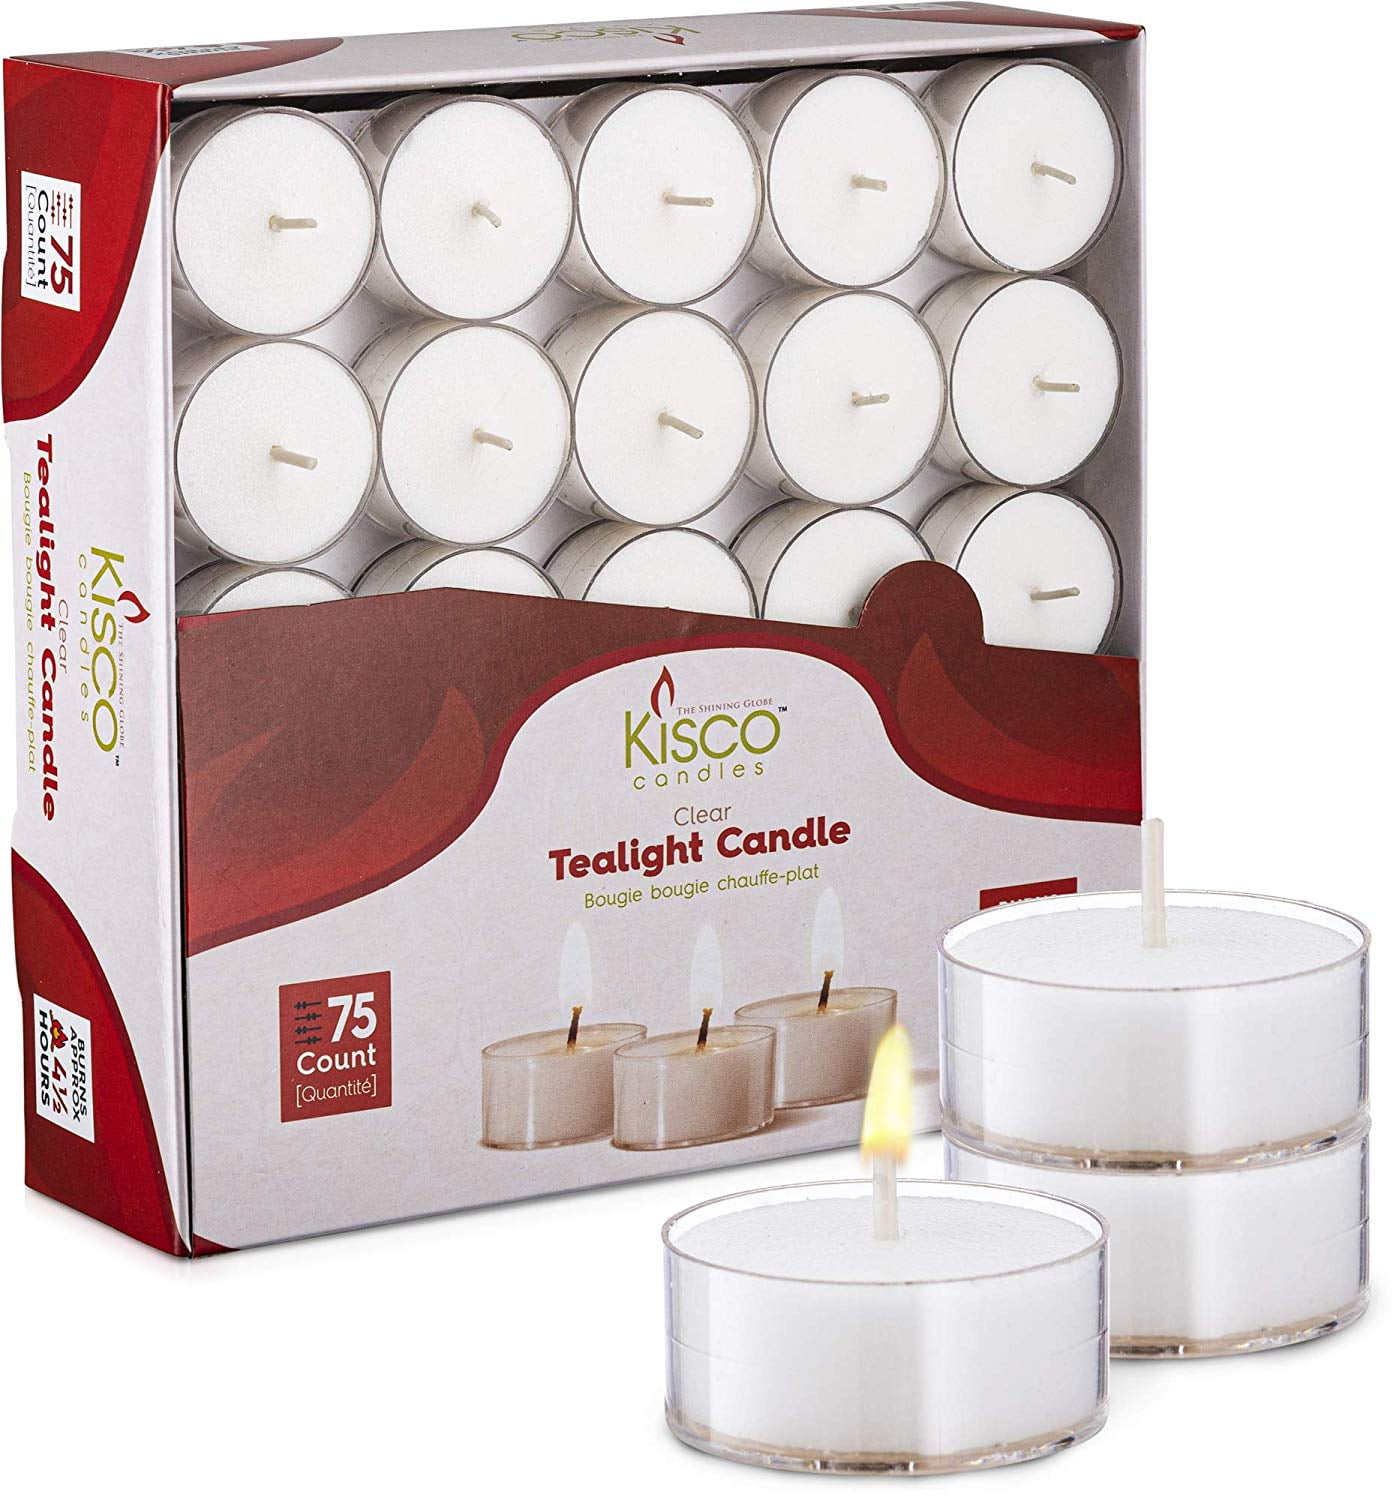 Beautiful Living Room KISCO CANDLES Votive Candles with Holders 24-Pack 6 Hours |Frosted White Decorative Glass Home Décor Long-Lasting Wax Kitchen Bathroom Lighting 